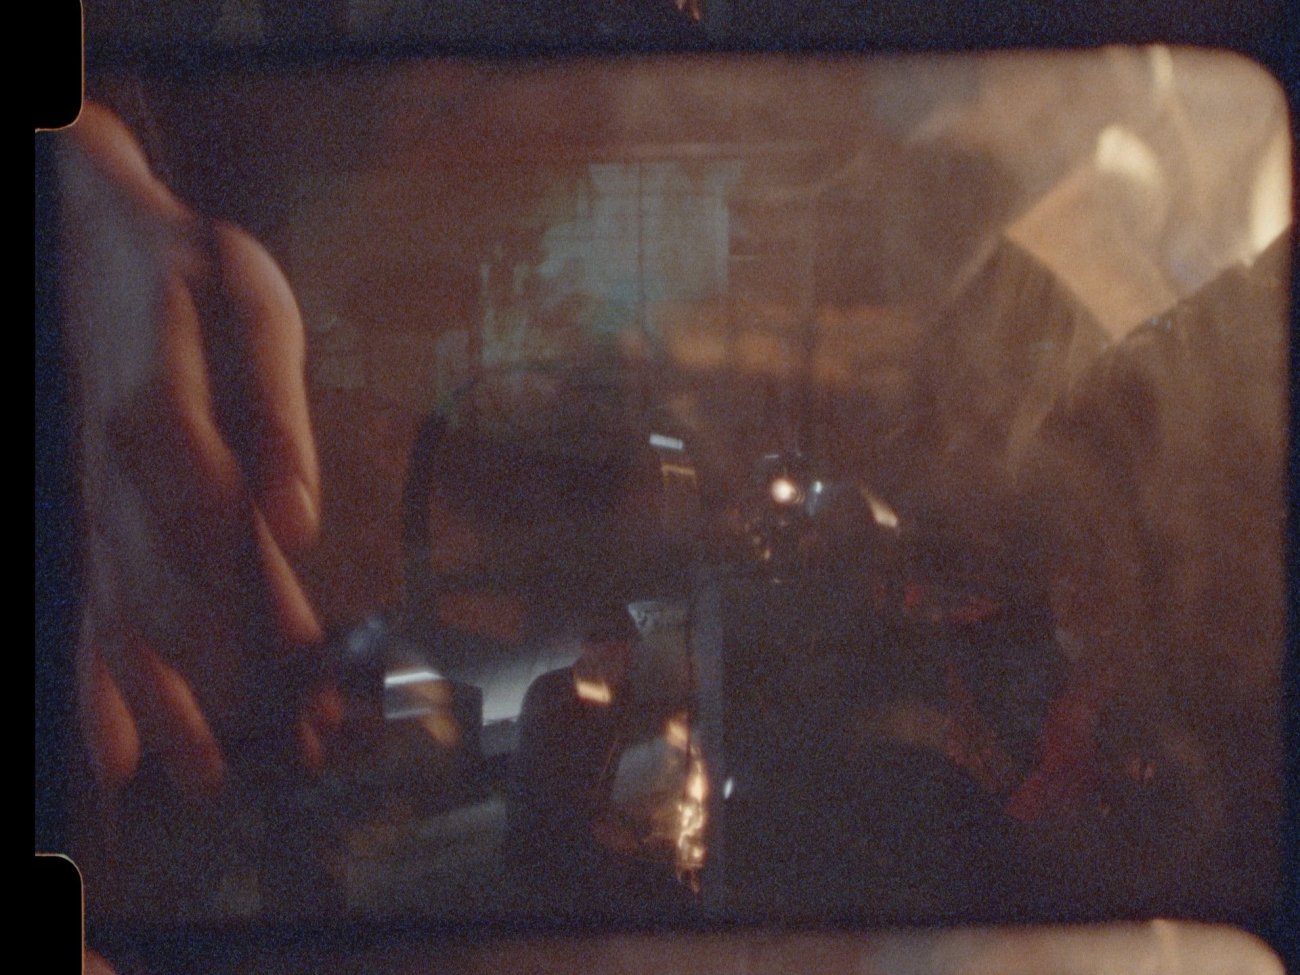 a still of a frame of a 8mm film shows a image with muliple exposure, hazy and brown with spots of light we see a hand entering the frame on the left manipulating the faint image of a machine.